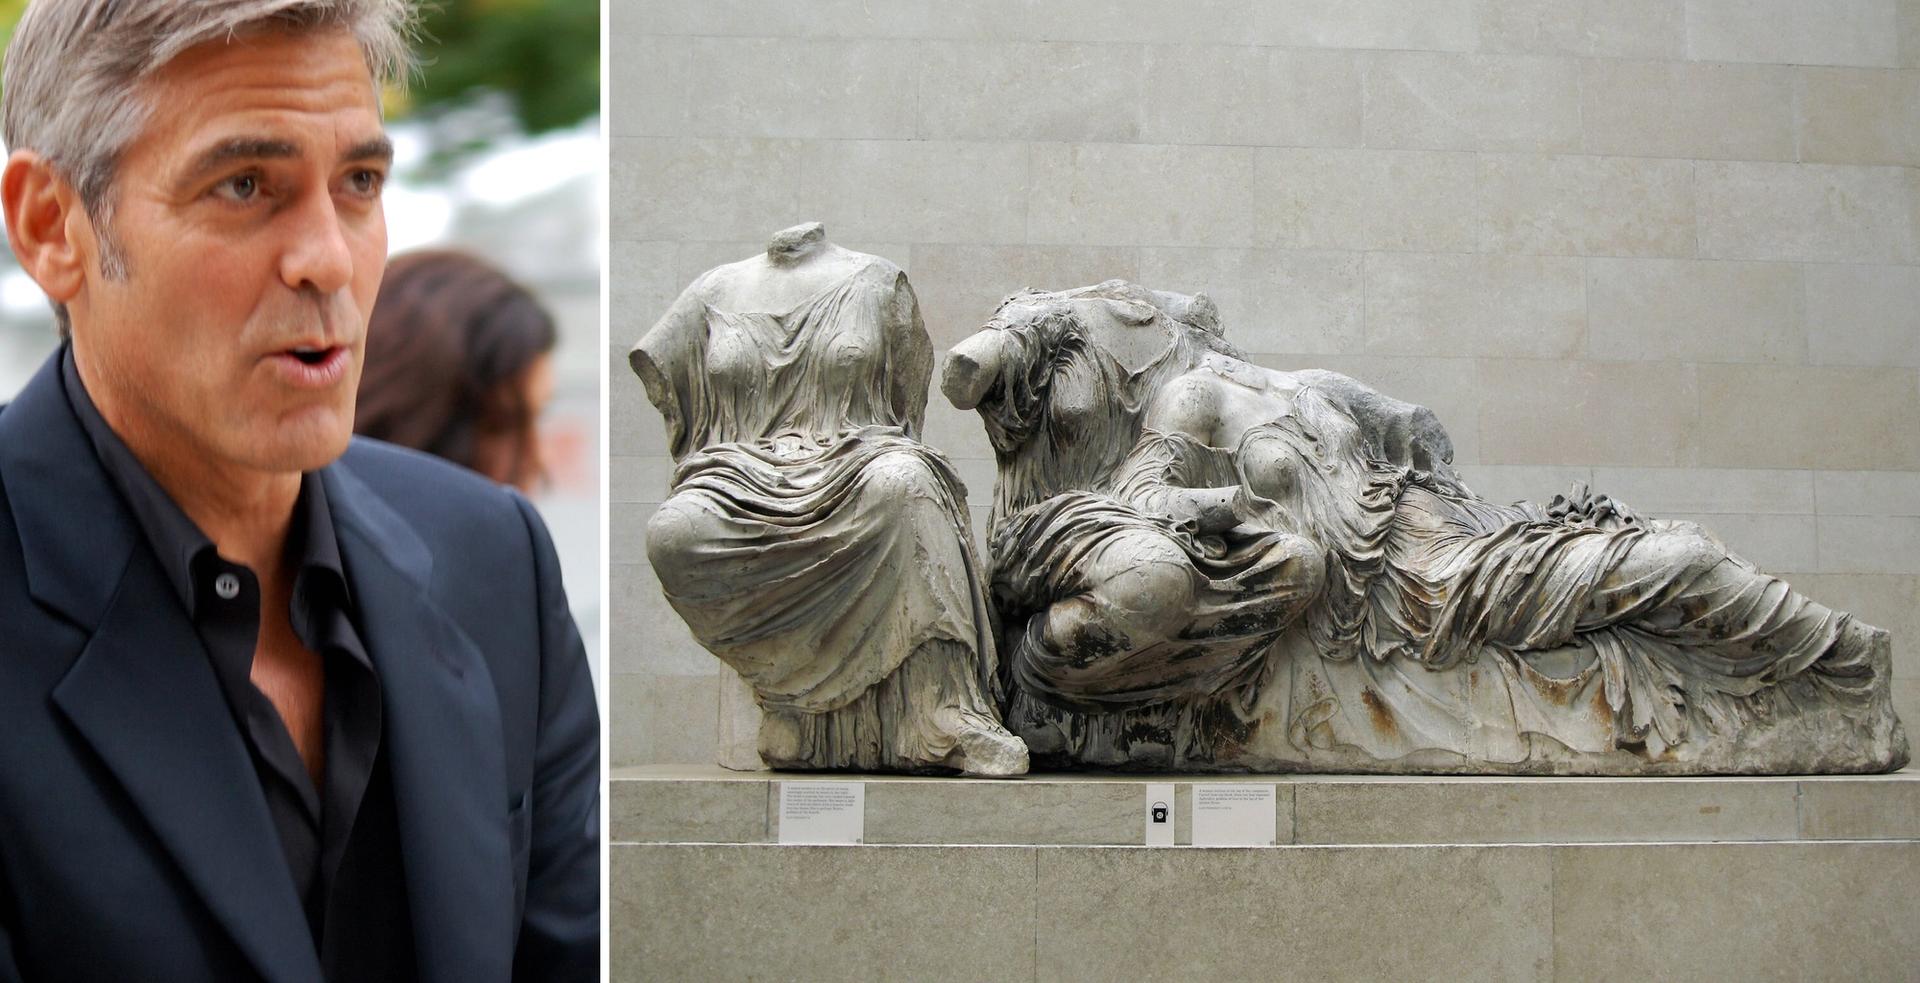 George Clooney first stated that the Parthenon Marbles should be returned to Greece during a trip to Berlin in February 2014 to promote the film The Monuments Men Clooney: Courtney/Flickr; Marbles: Justin Norris/Flickr